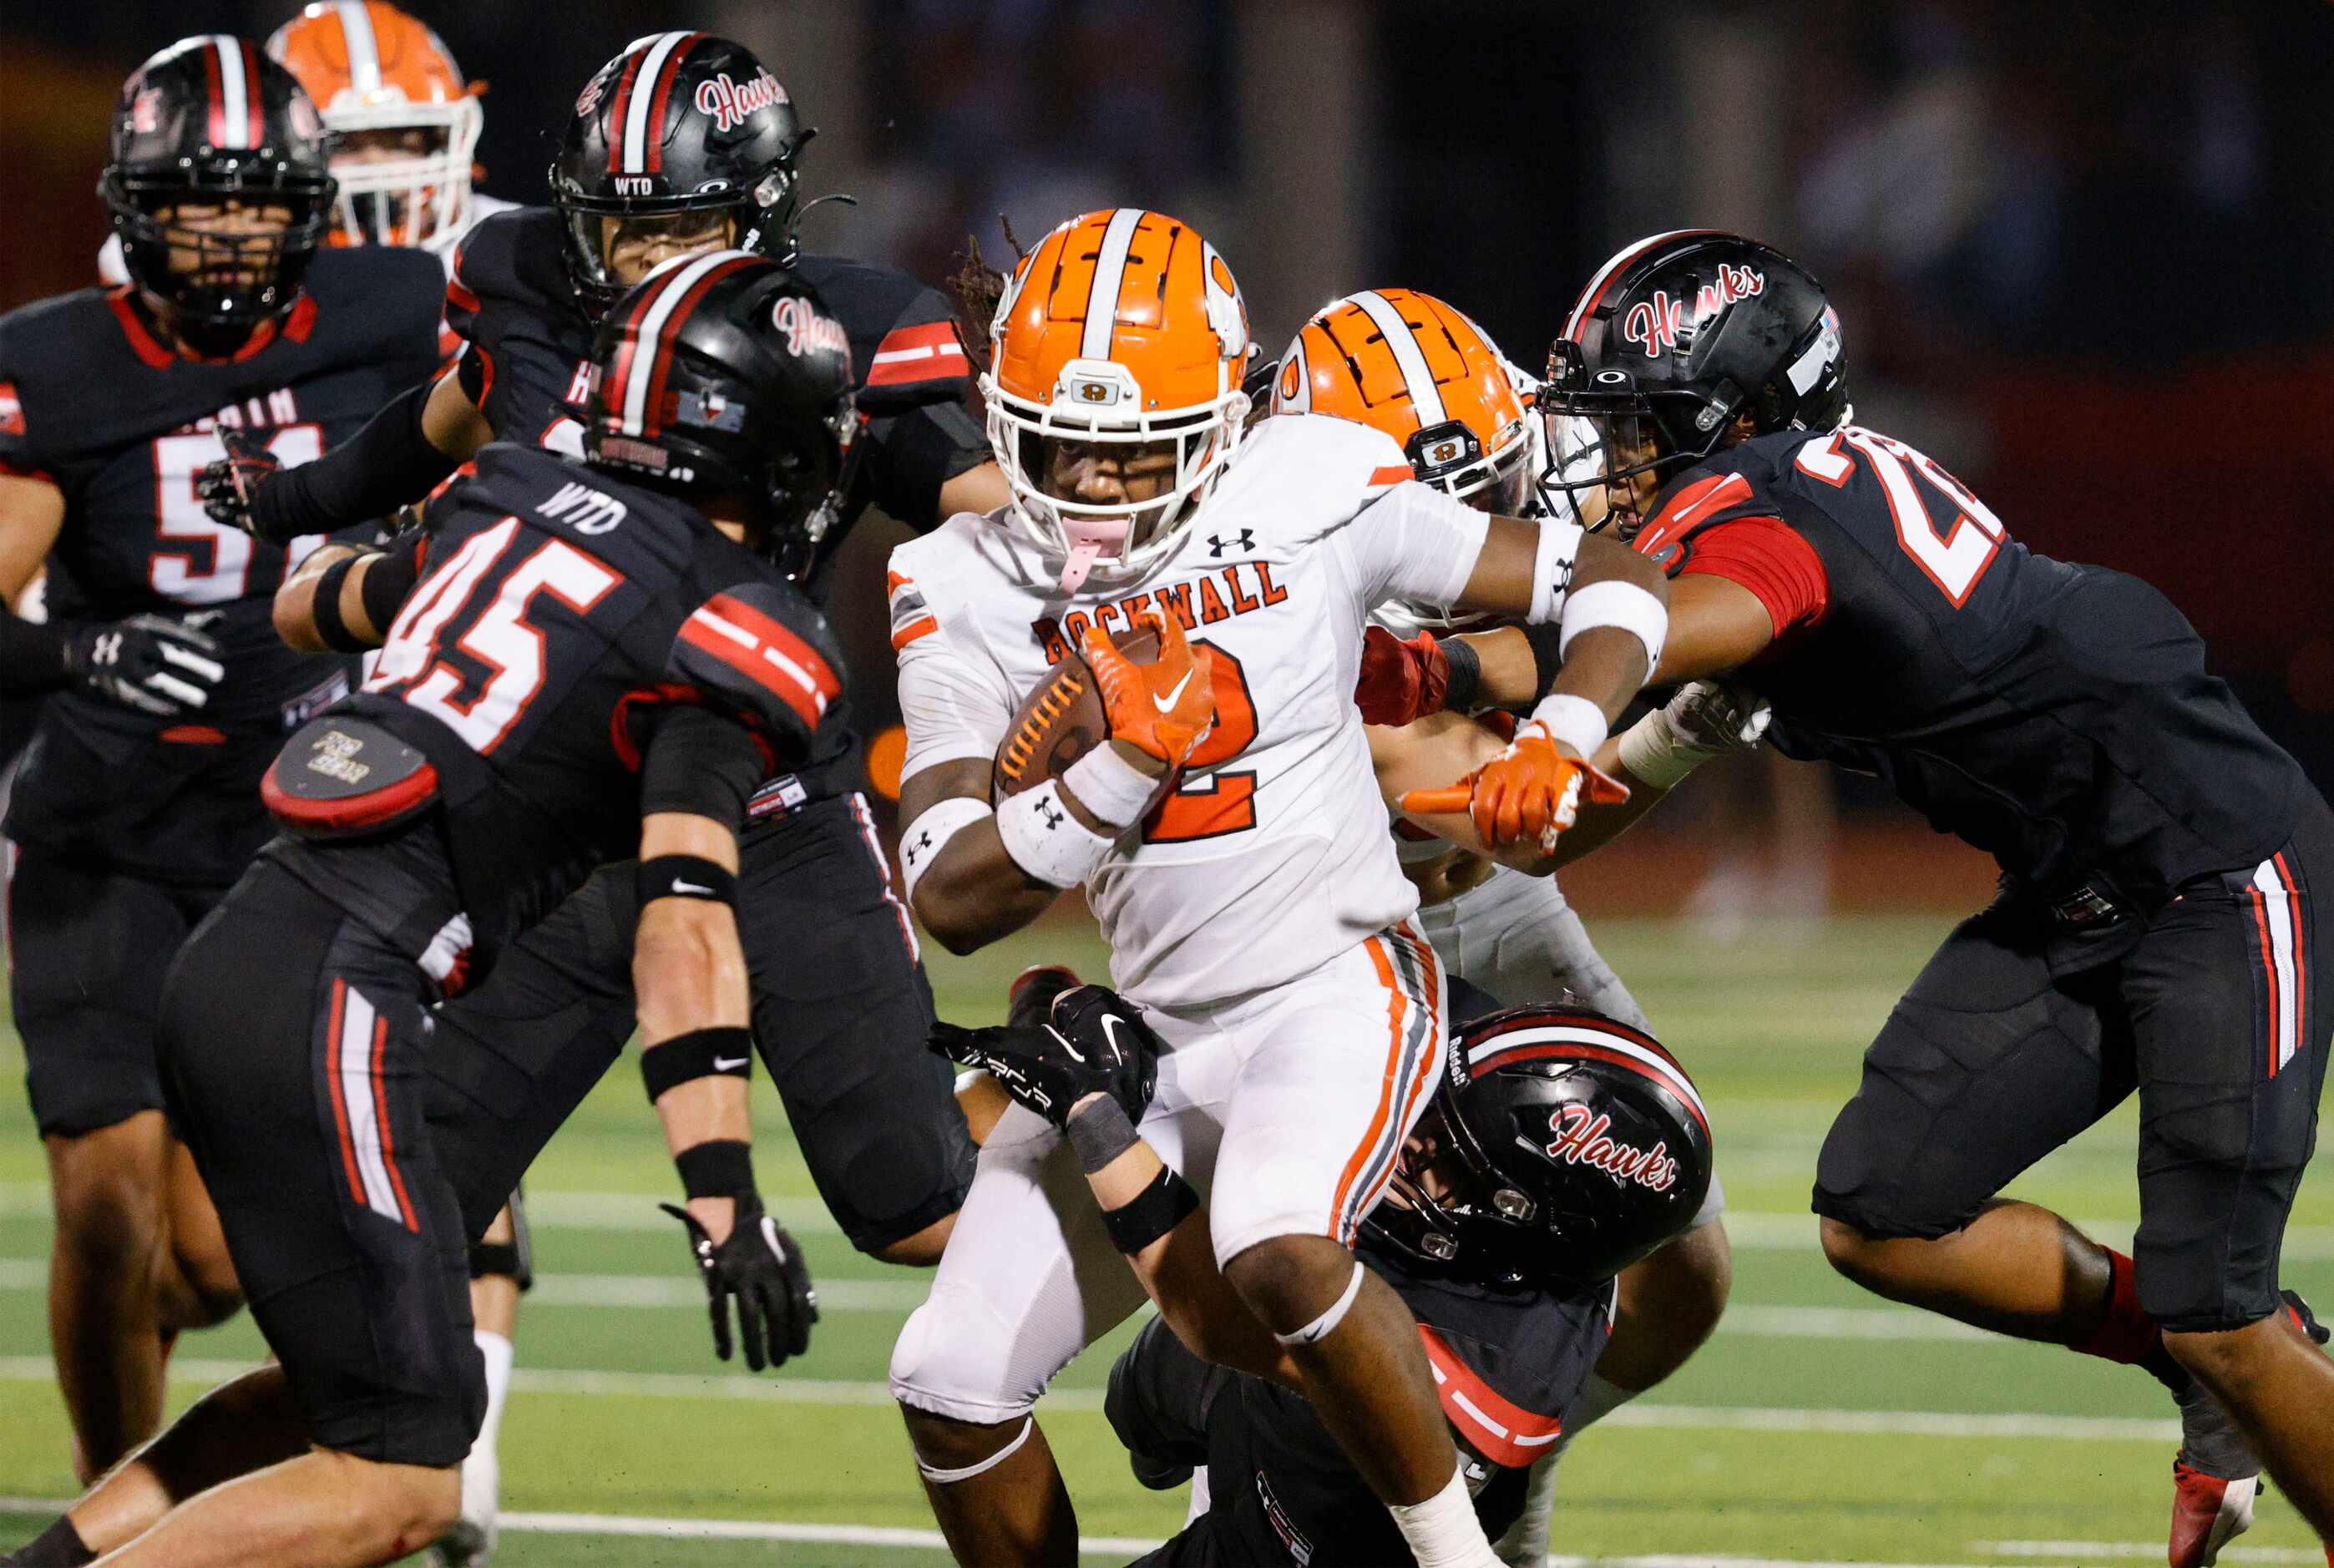 Rockwall's Ashten Emory (2) carries the ball as Rockwall-Heath defense players try to stop...